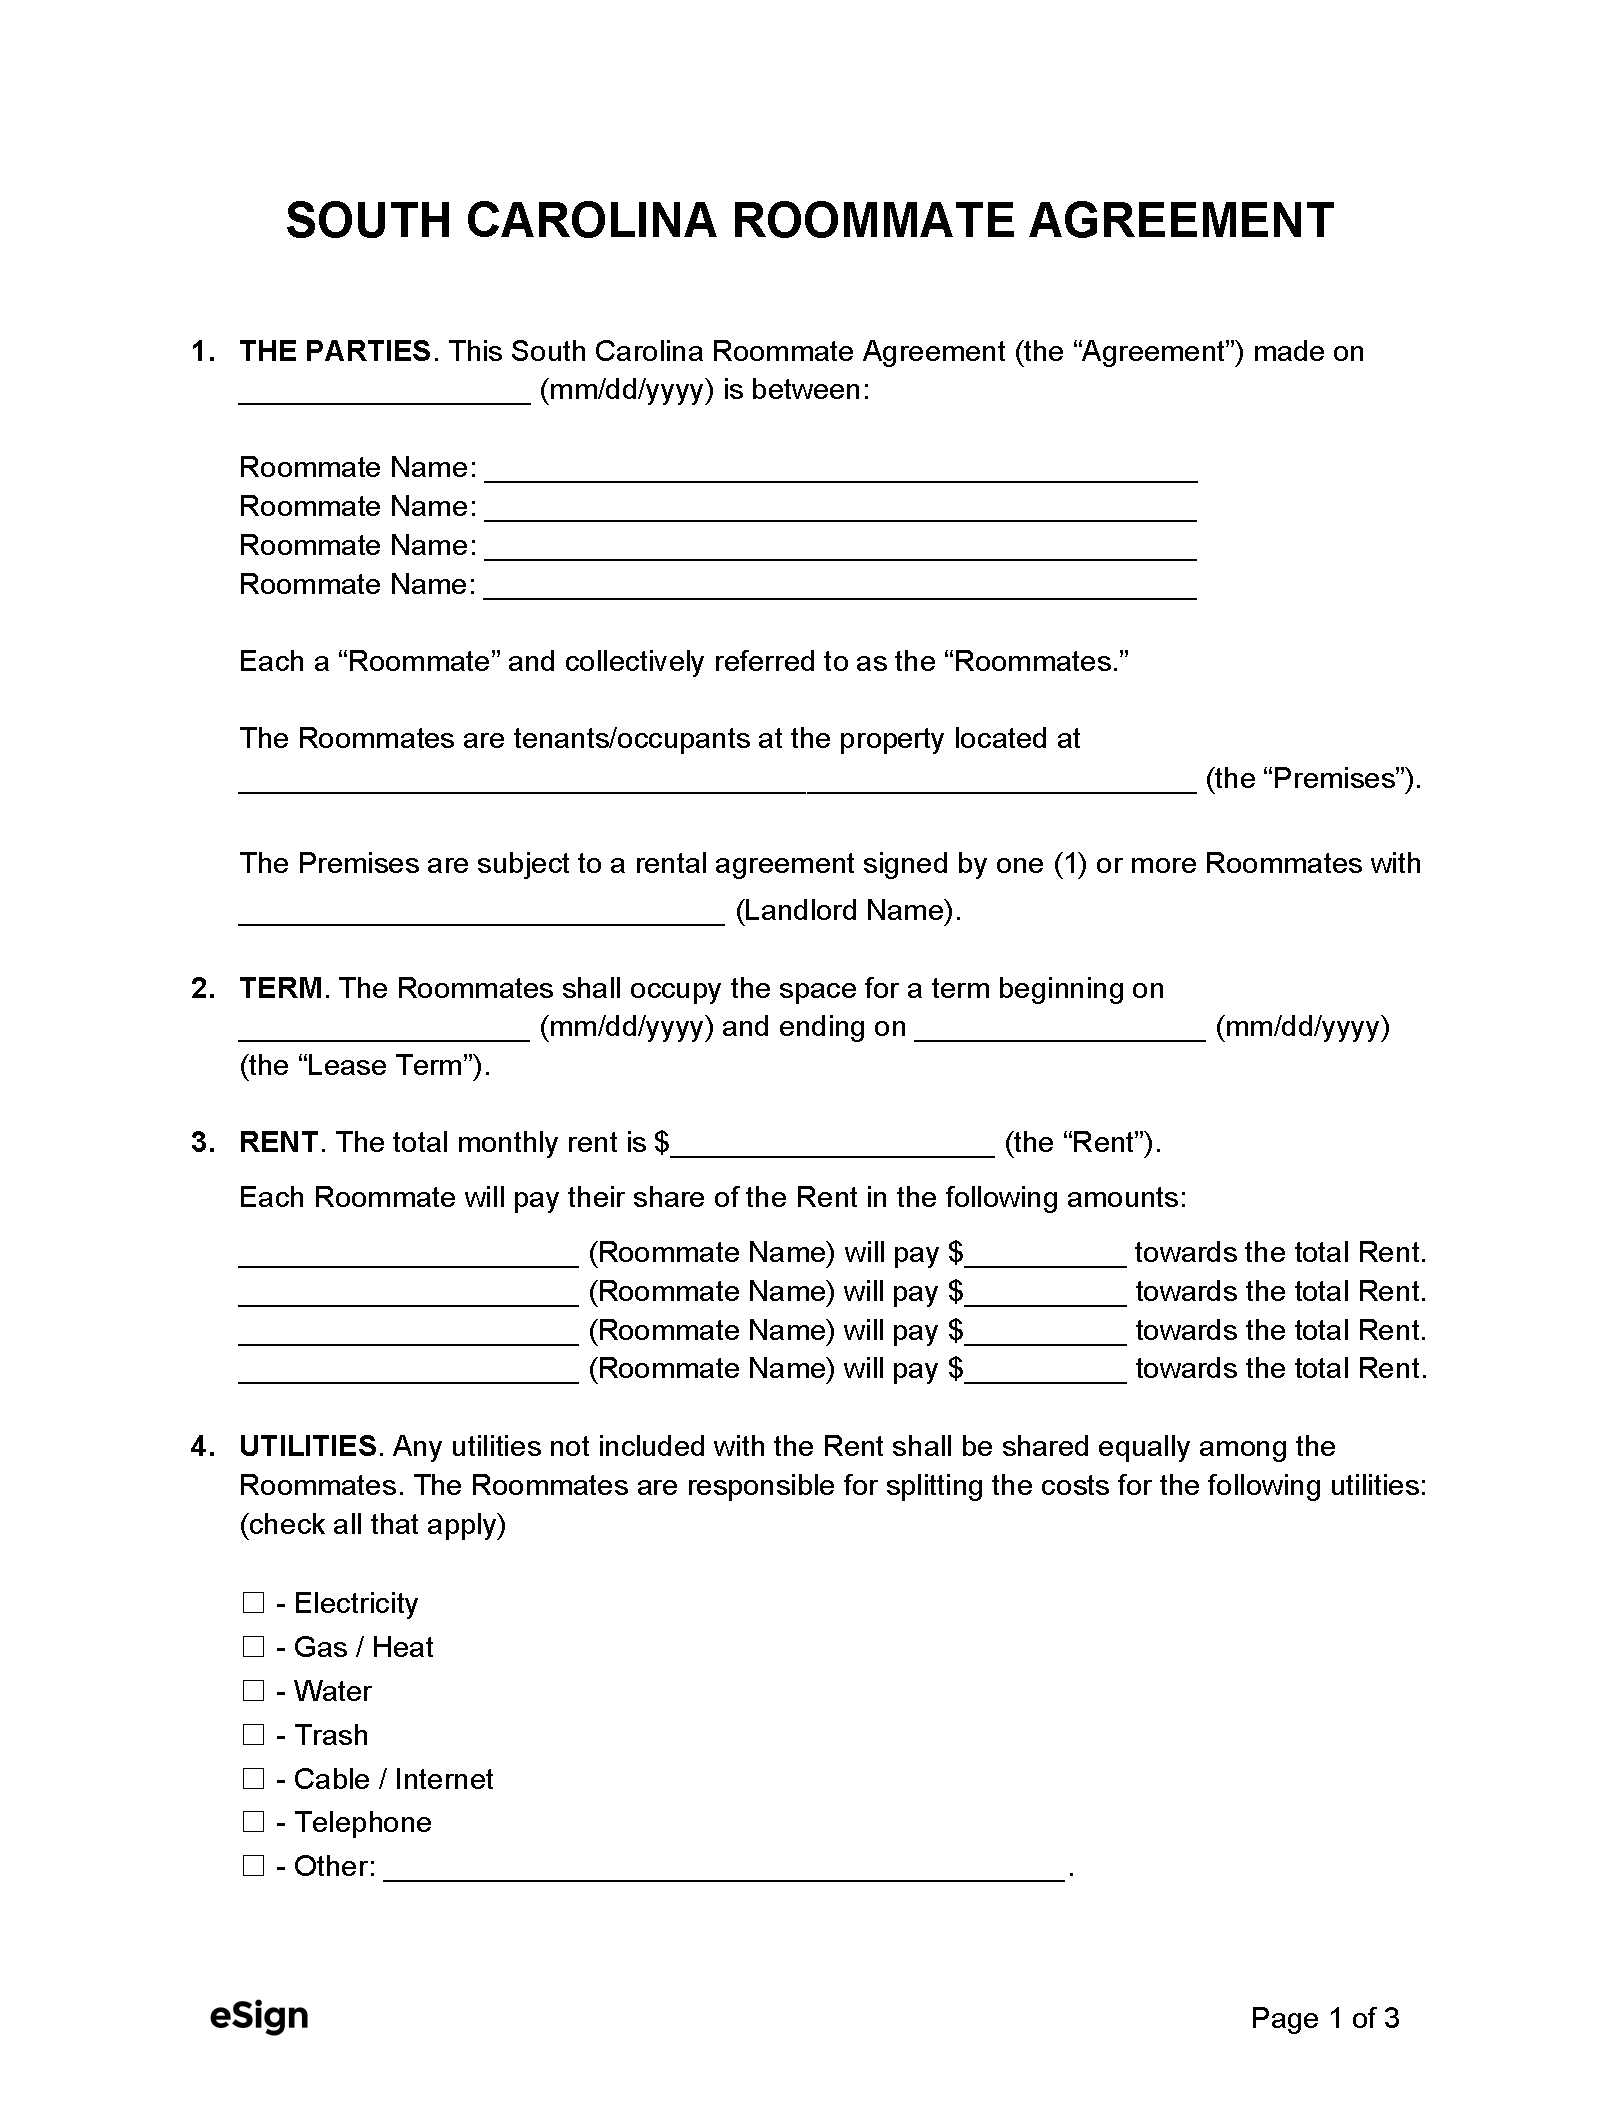 Free South Carolina Roommate Agreement Template - PDF  Word Throughout free roommate rental agreement template